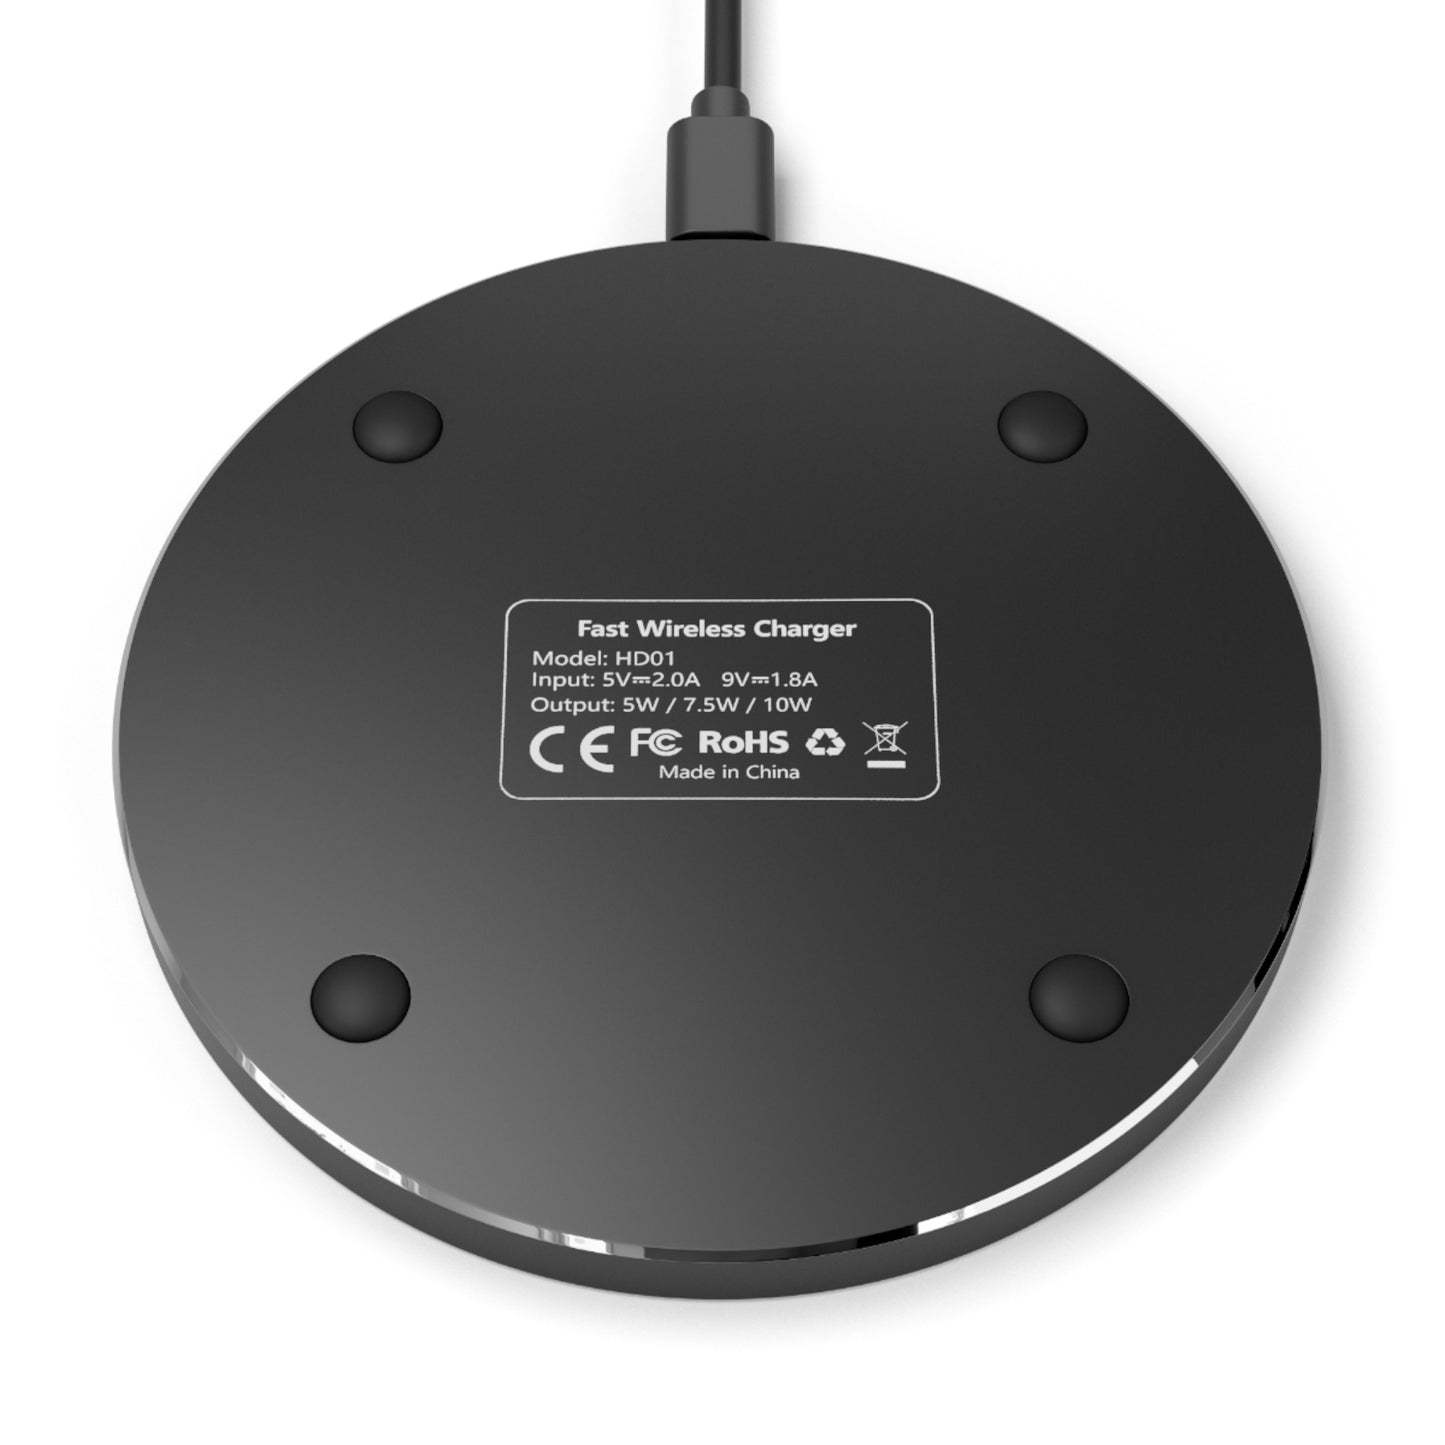 FreedomKat Designs Logo Wireless Charger